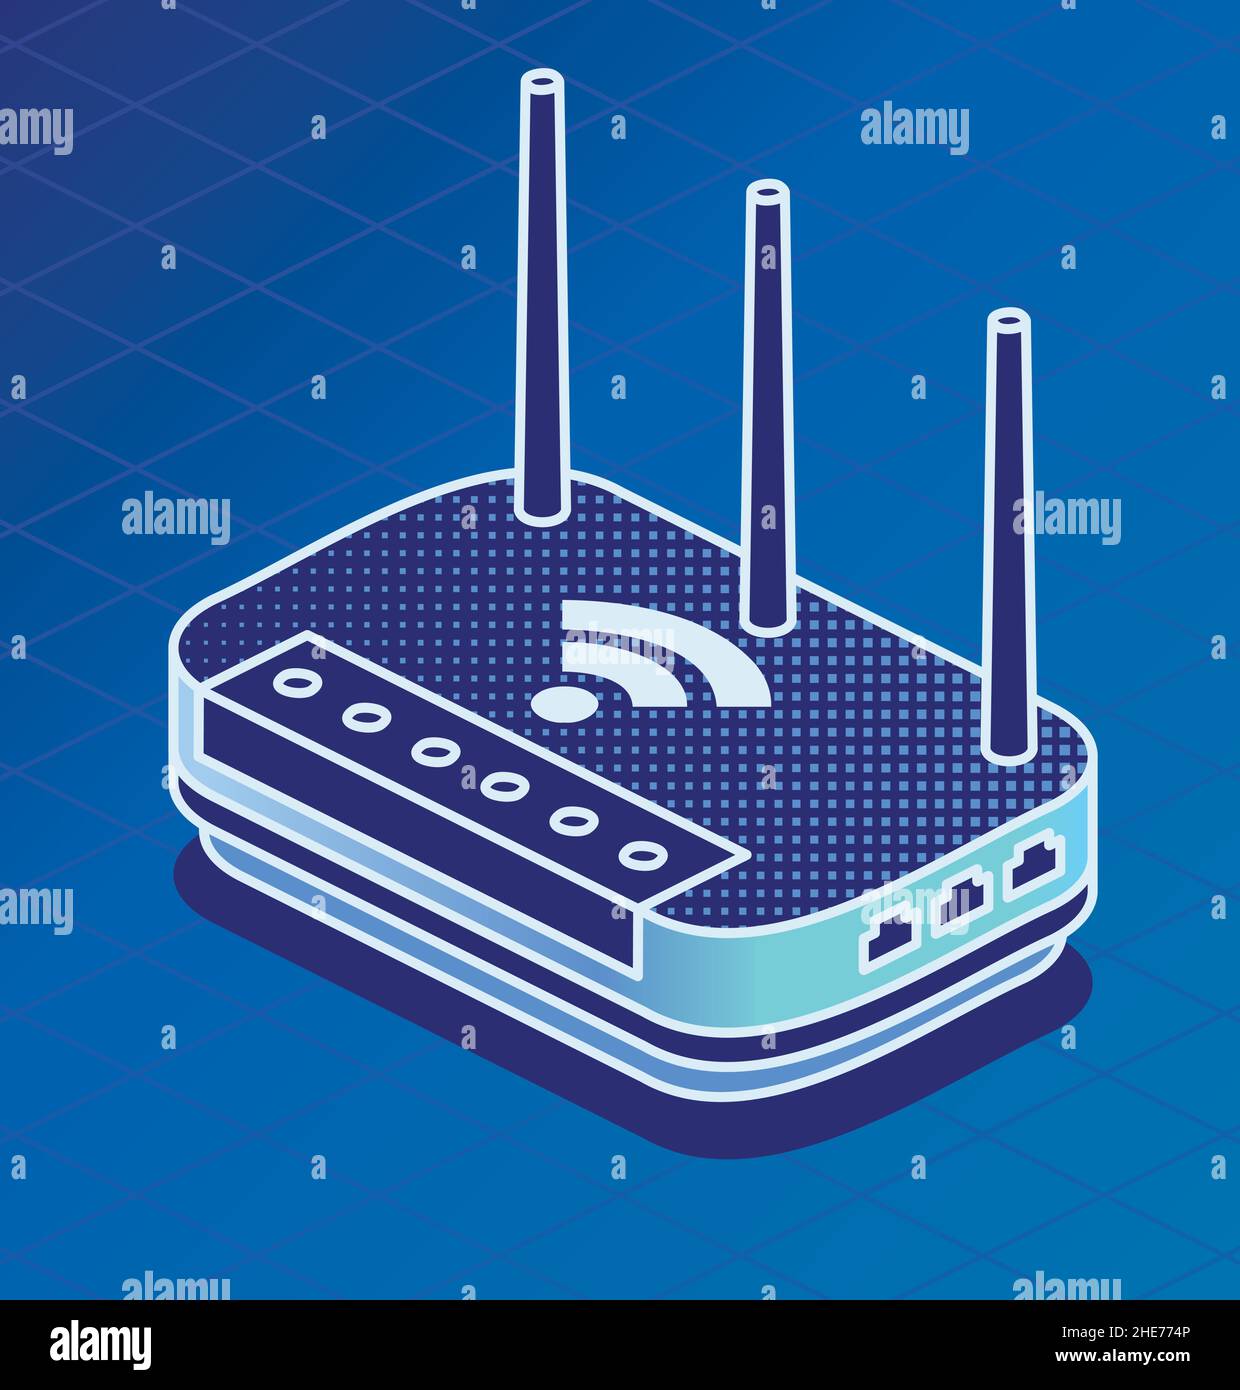 Isometric Network Router. Vector Illustration. Outline Wifi Wireless Router with Antennas on Blue Background. Stock Vector